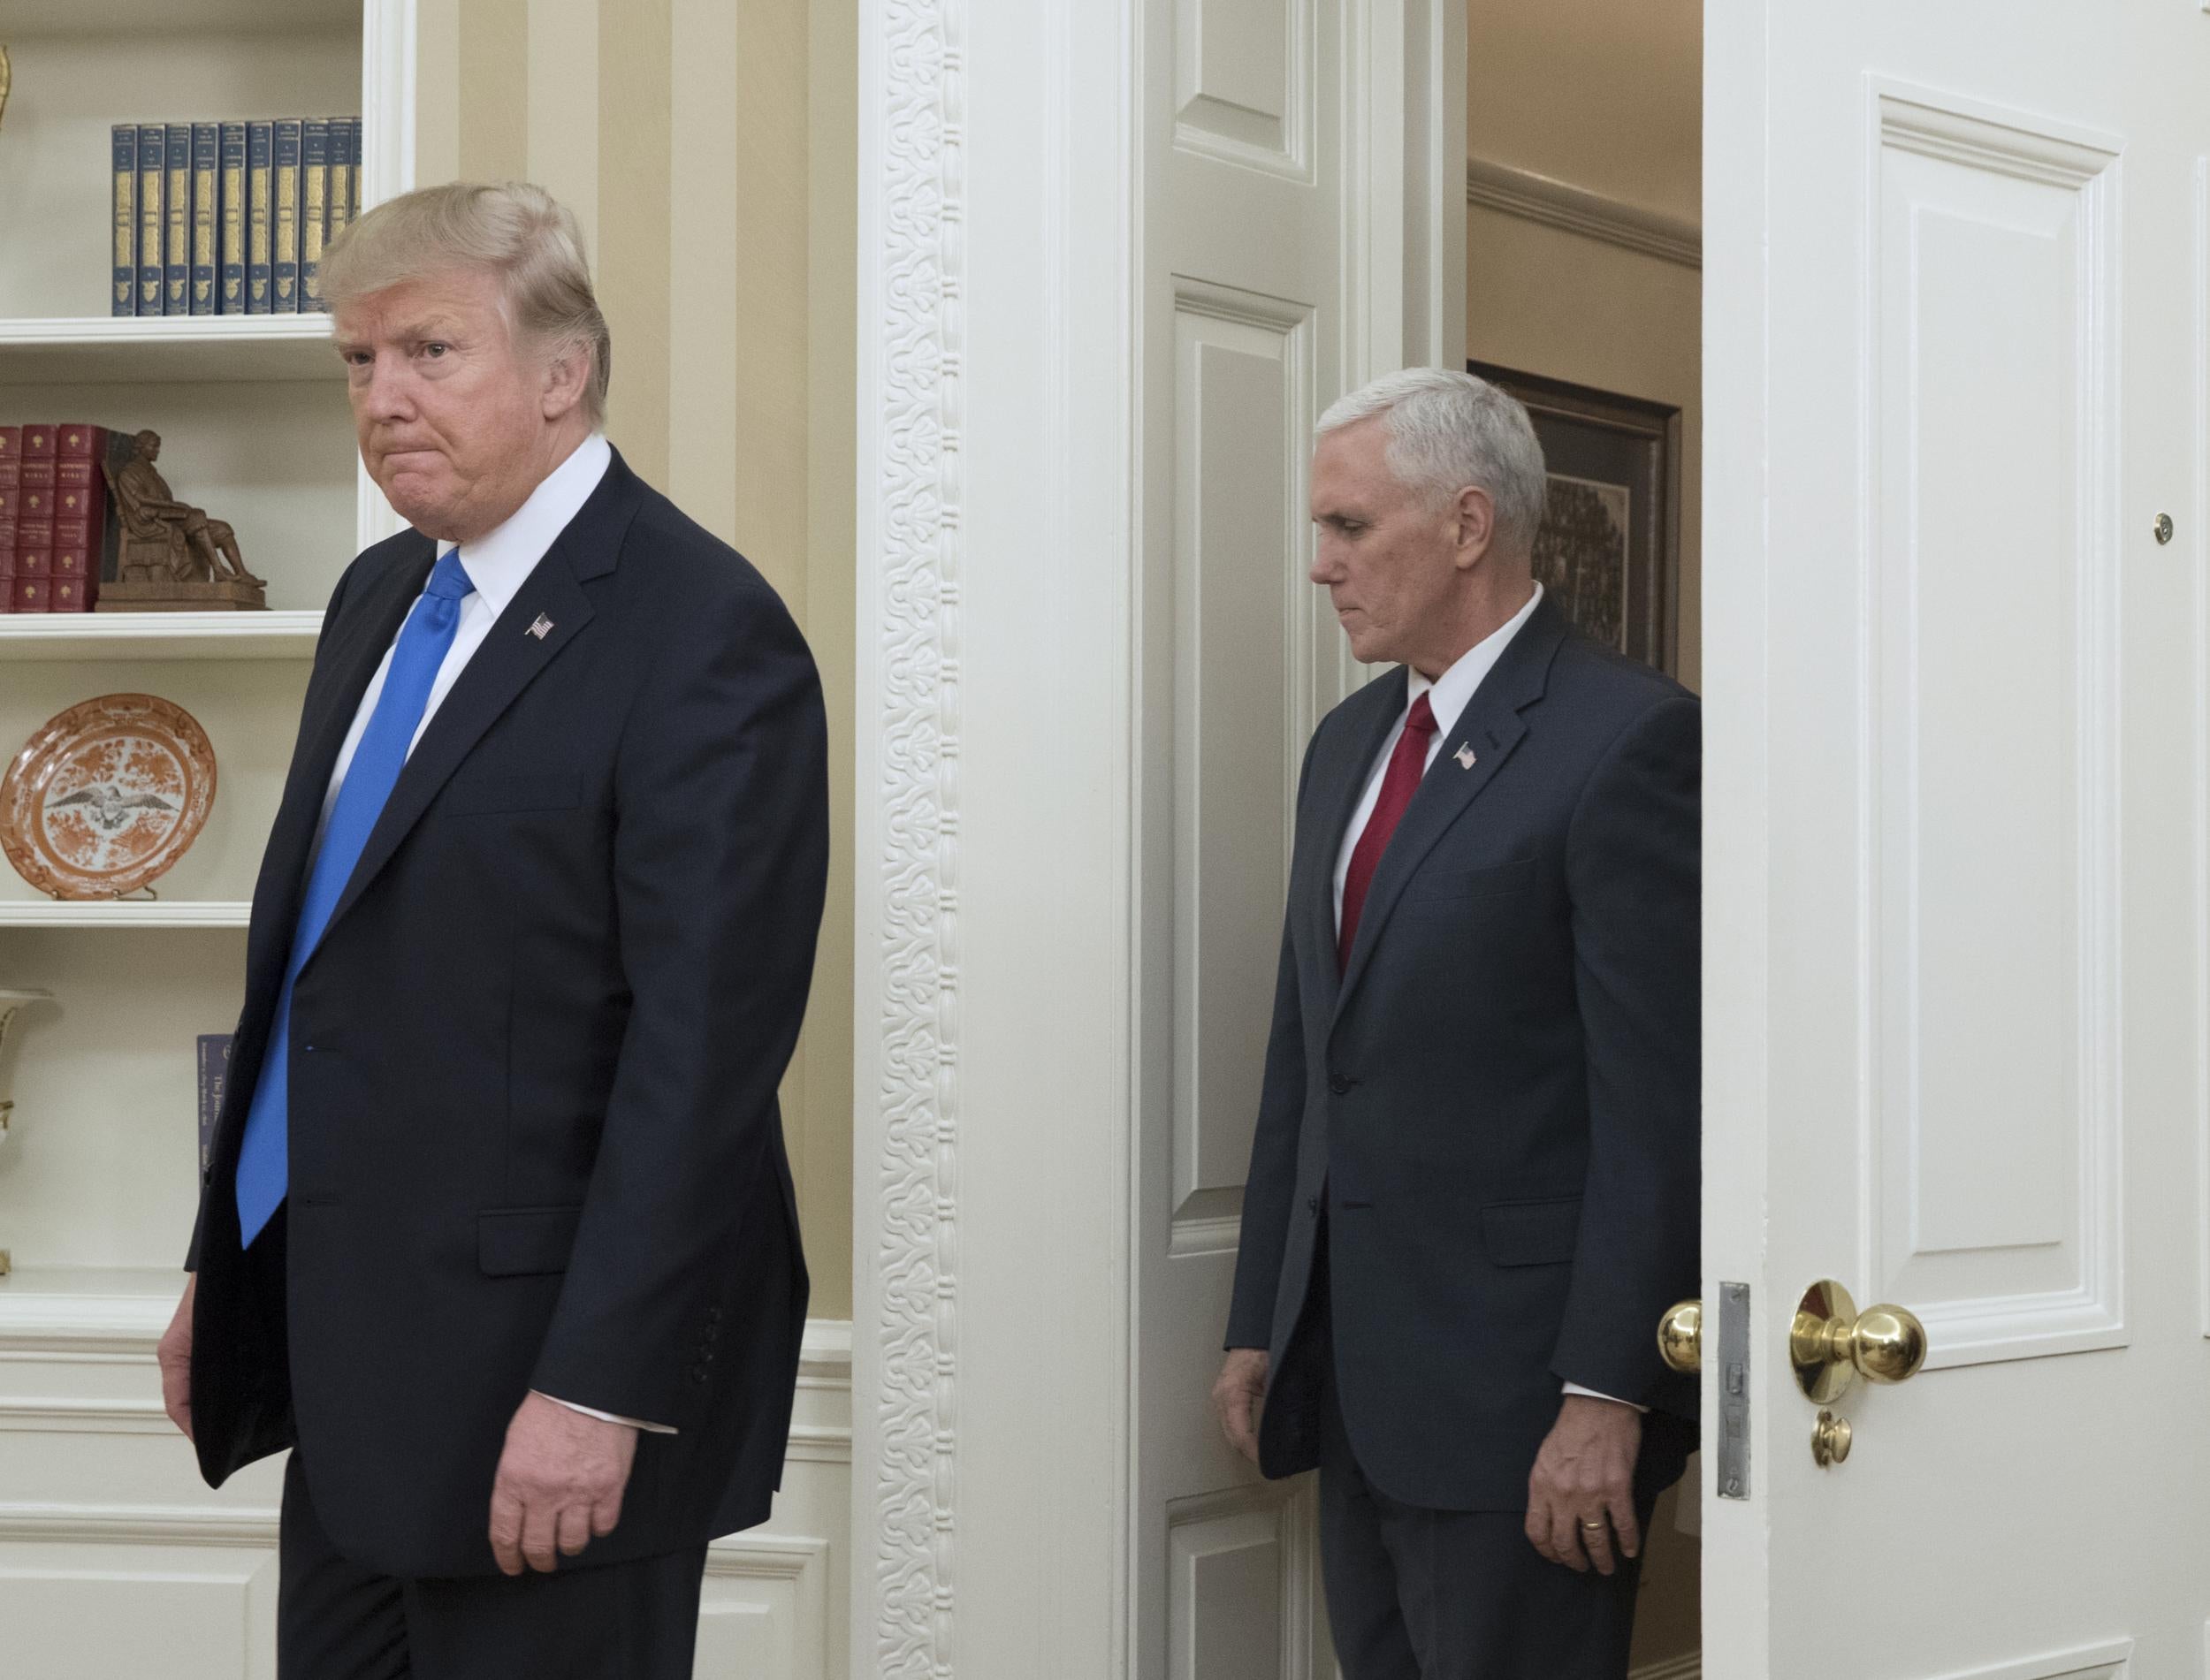 US President Donald J. Trump (L) and US Vice President Mike Pence (R) enter the Oval Office